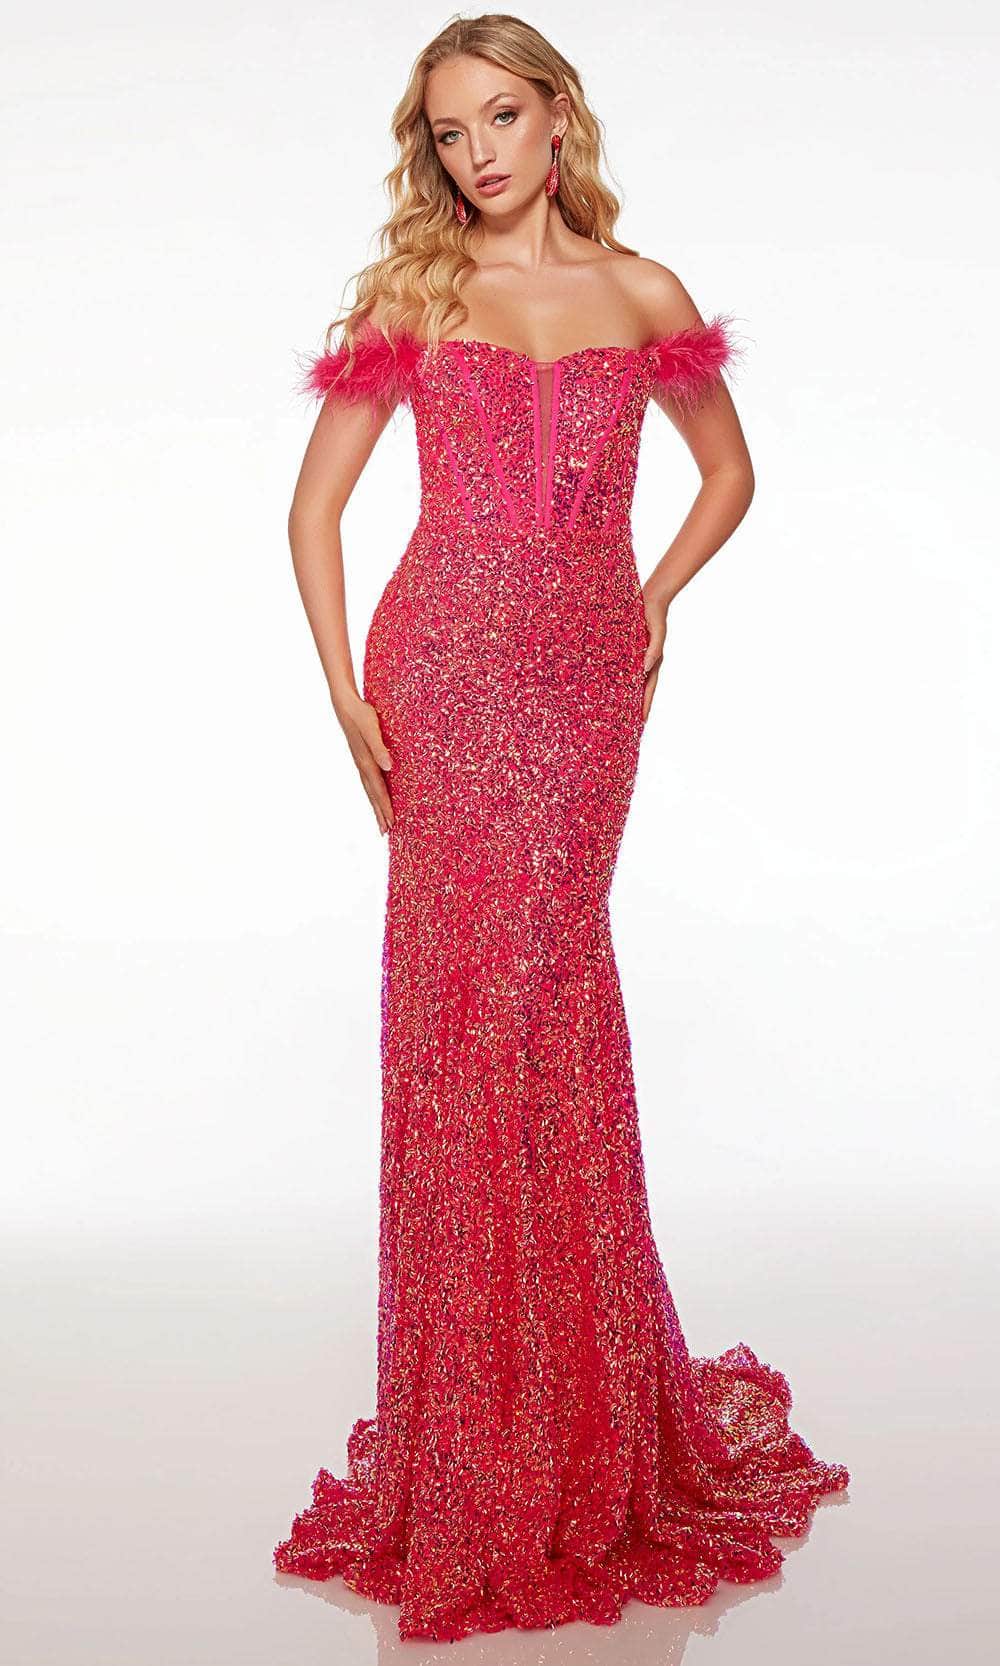 Alyce Paris 61502 - Fully Sequin Corset Prom Gown Special Occasion Dress 000 / Barbie Opal